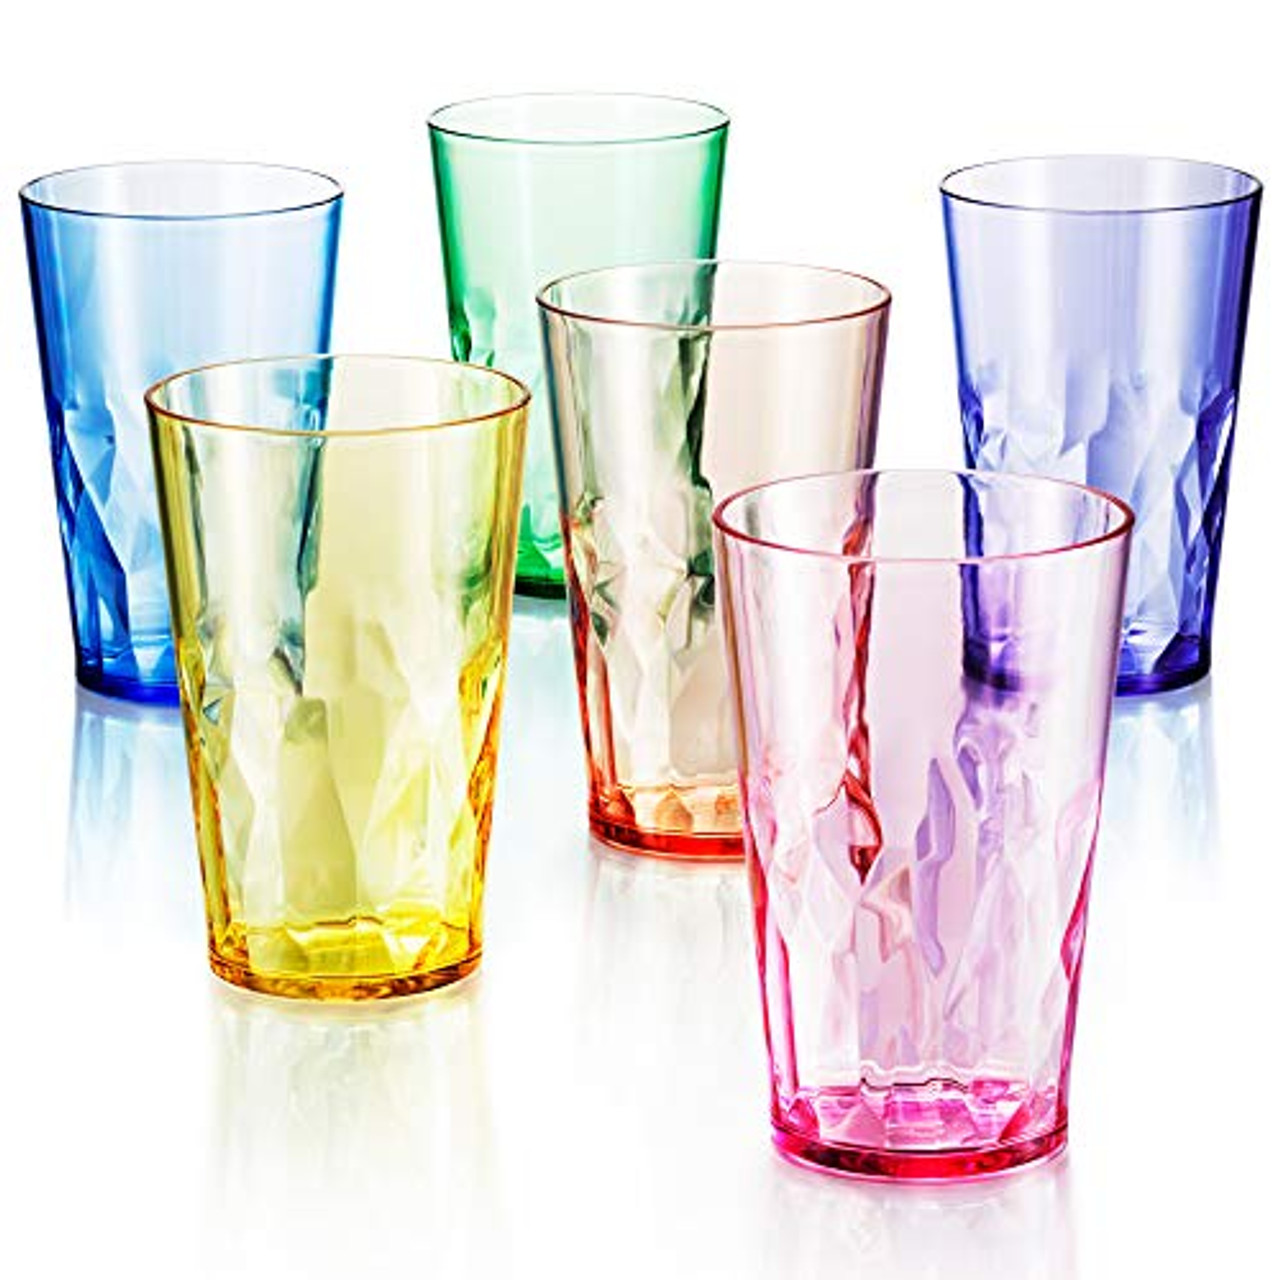 HOME-X Colorful Aluminum Drinking Cups Set of 6, Colored Metal Tumblers,  Shatter Resistant, Stackabl…See more HOME-X Colorful Aluminum Drinking Cups